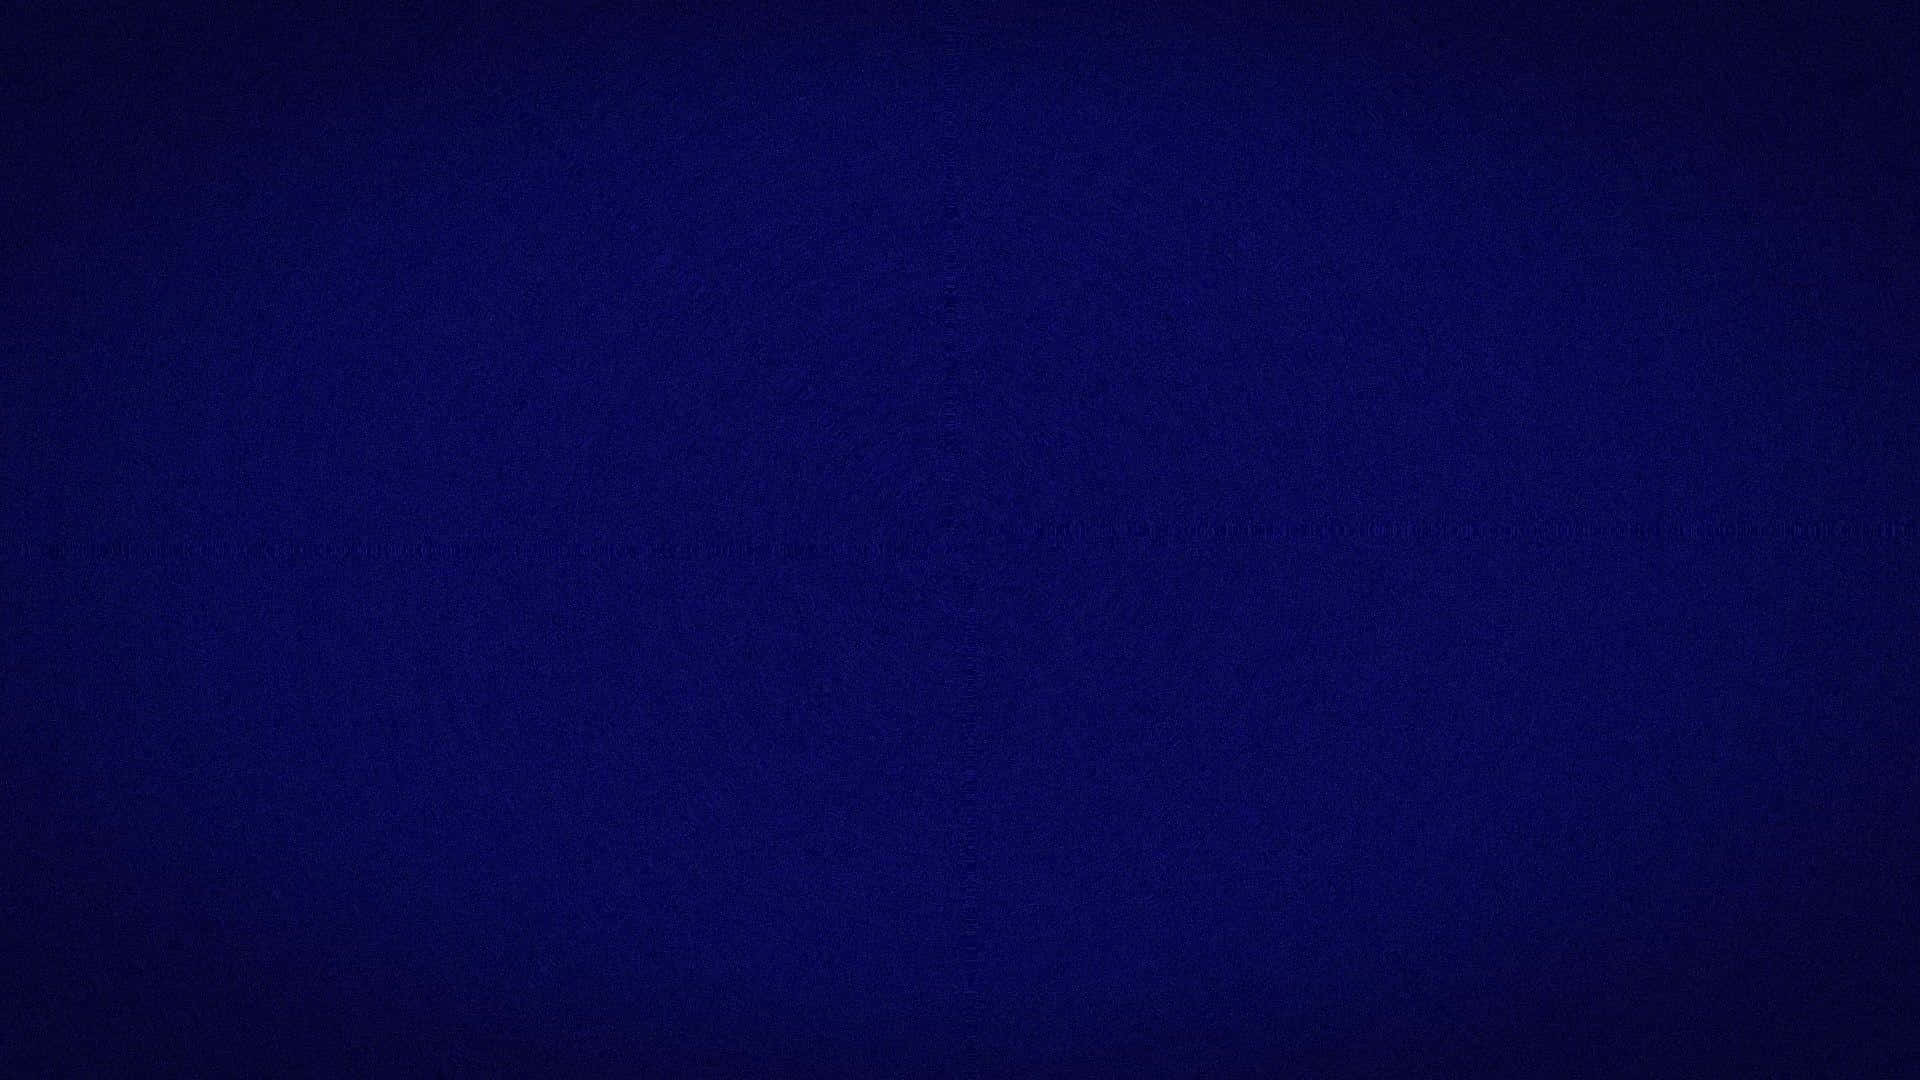 A Dark Blue Background With A Light Circle